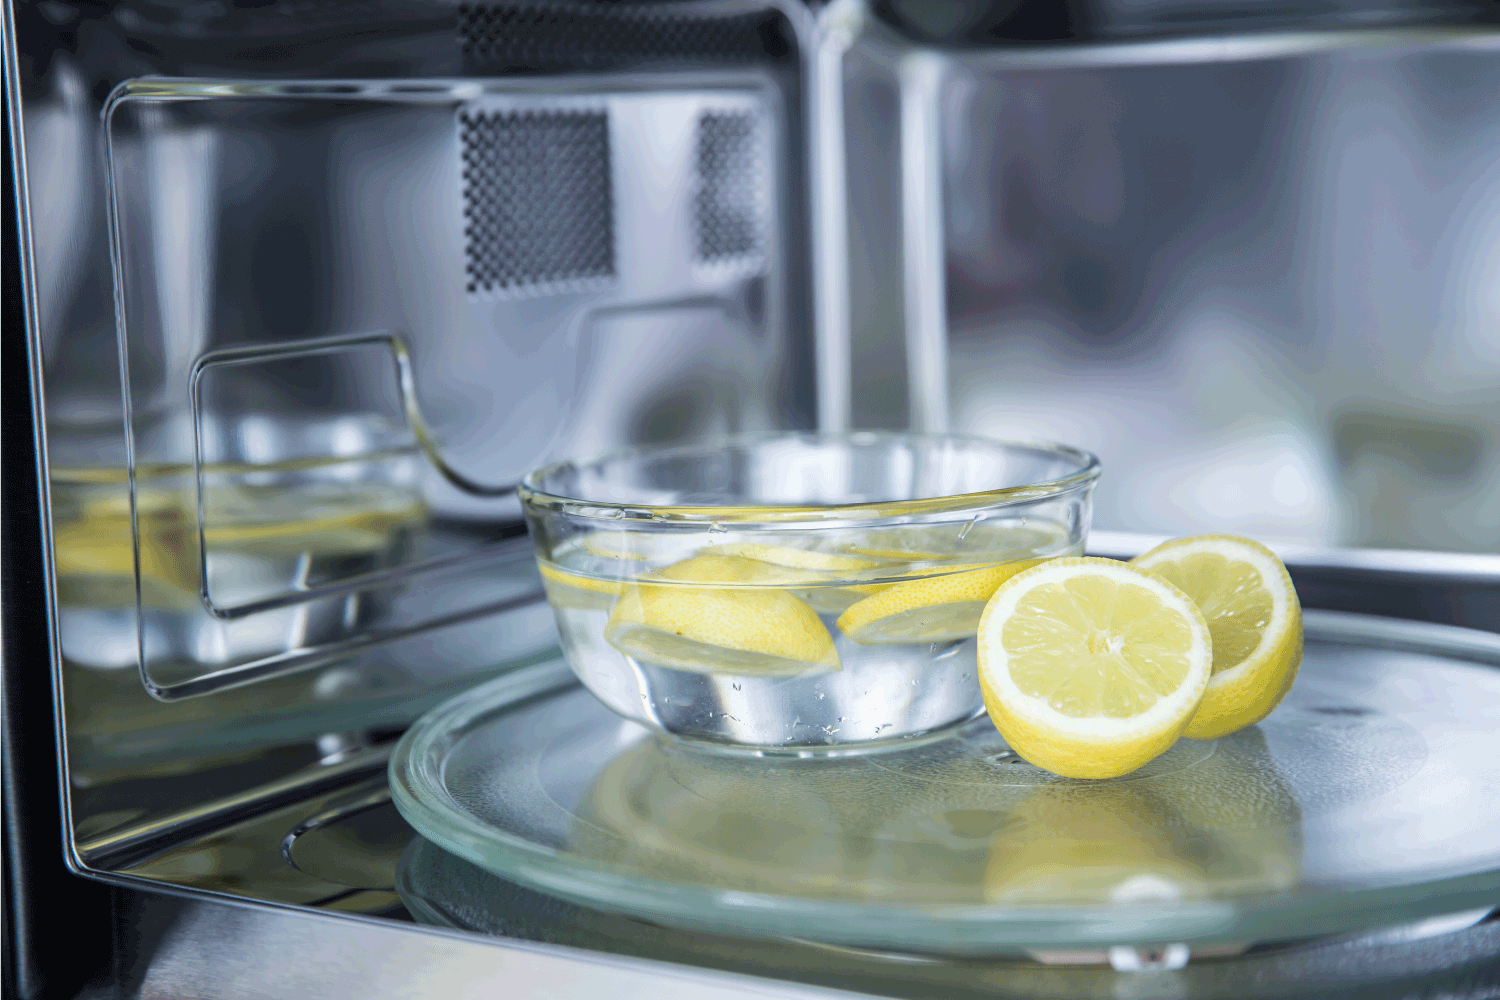 A method of cleaning in a microwave oven with water and lemon.